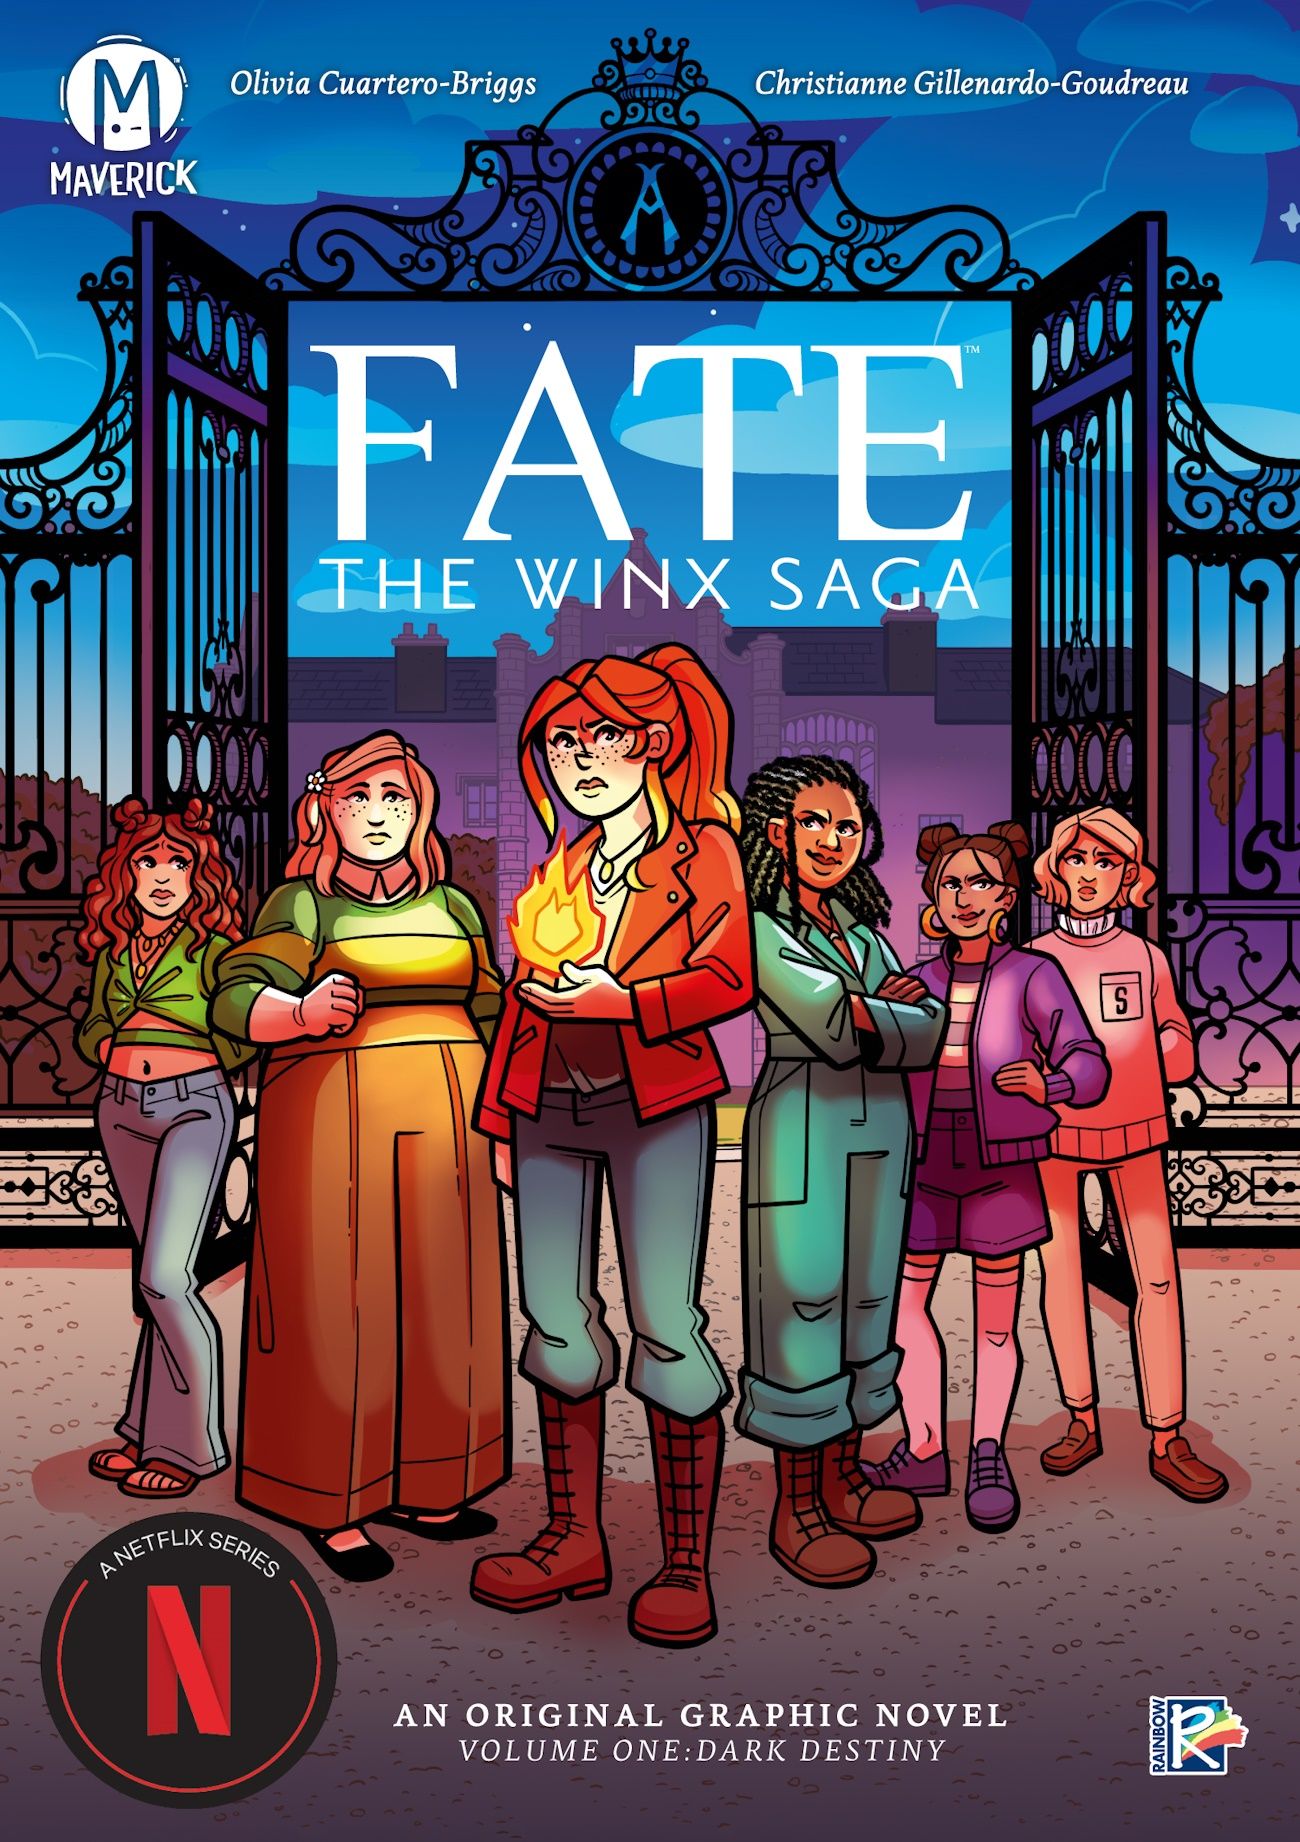 First Look at Netflix Sequel FATE: THE WINX SAGA Vol. 1 (Exclusive)